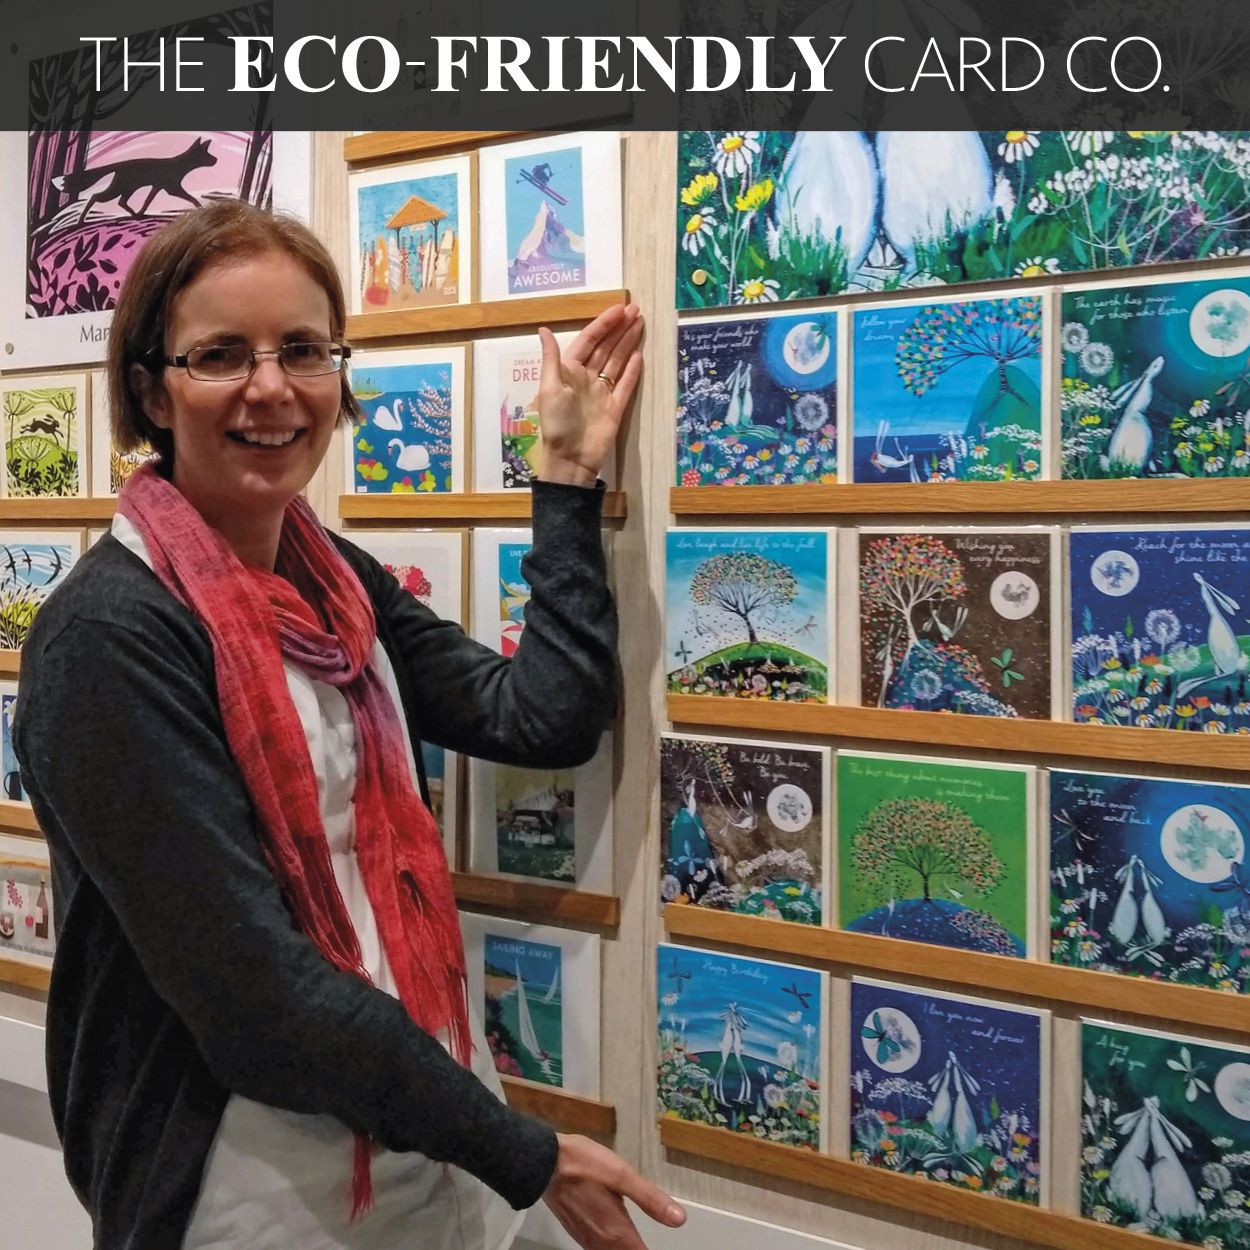 The Eco-friendly Card Co